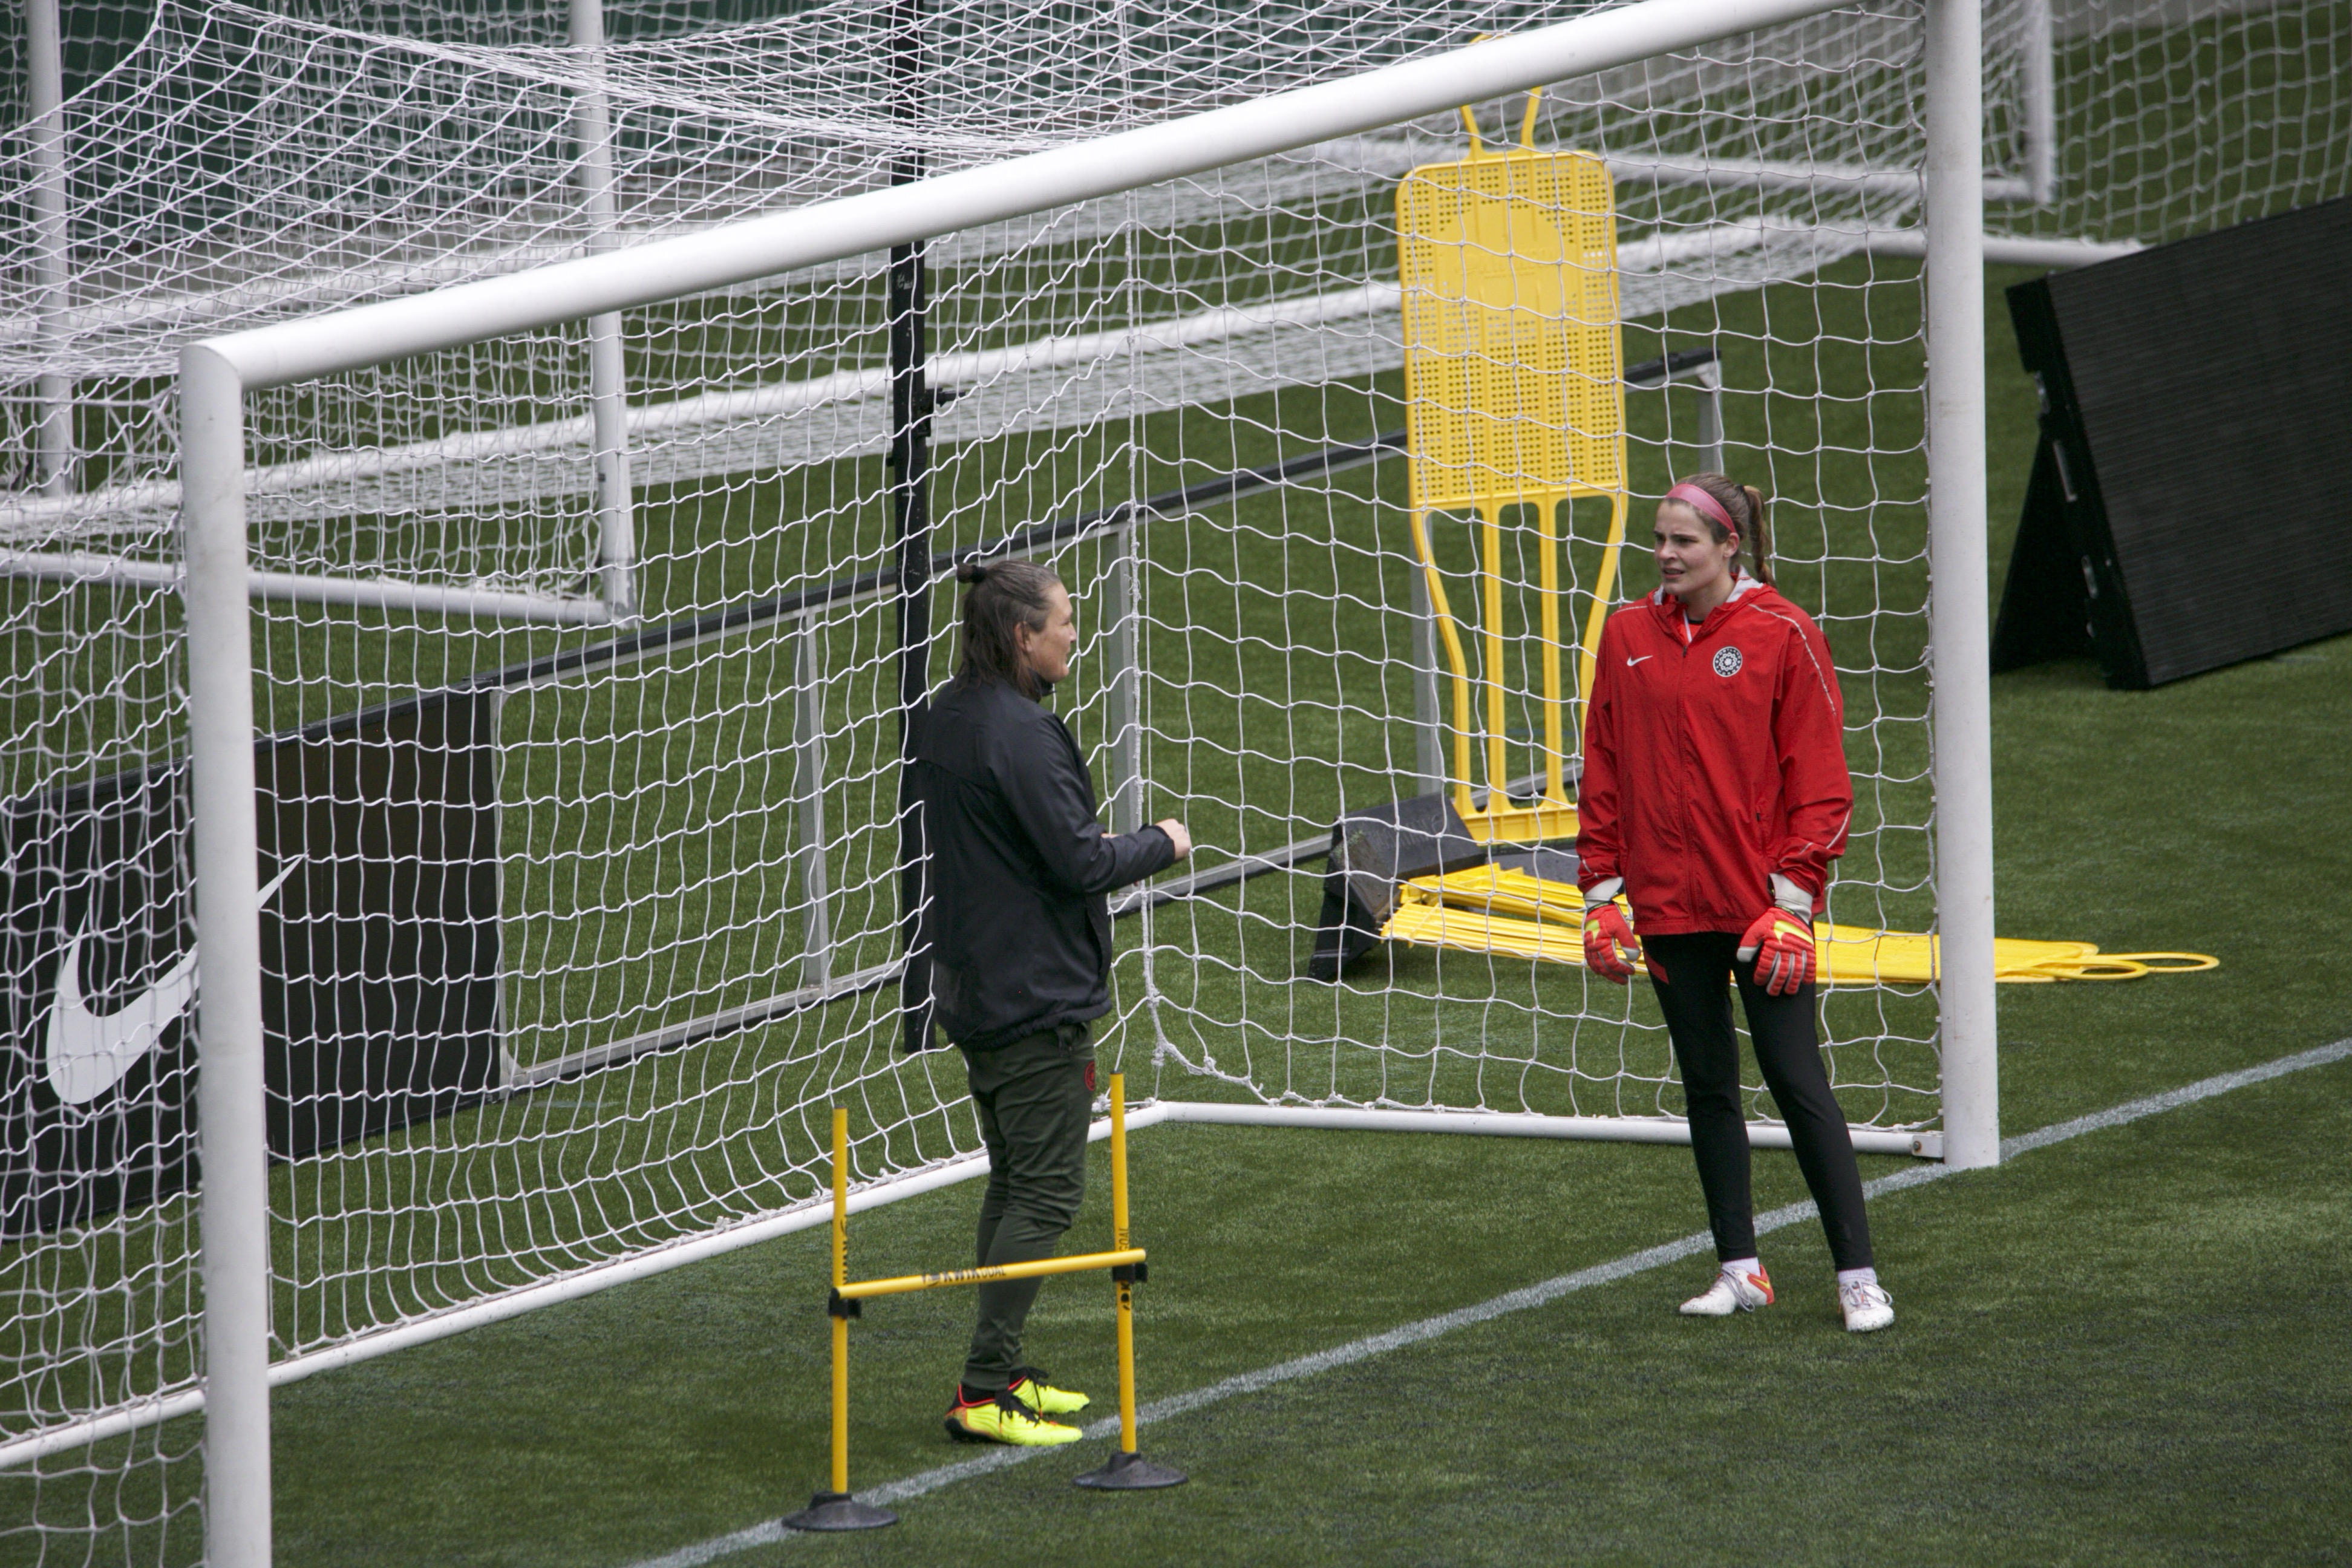 Lauren Kozal works with Goalkeeper coach and legend Nadine Angerer during Portland Thorns Training. Photo Credit: Taylor Vincent @tayvincent6 - Contributing Writer for The Equalizer and BGN (Beautiful Game Network)